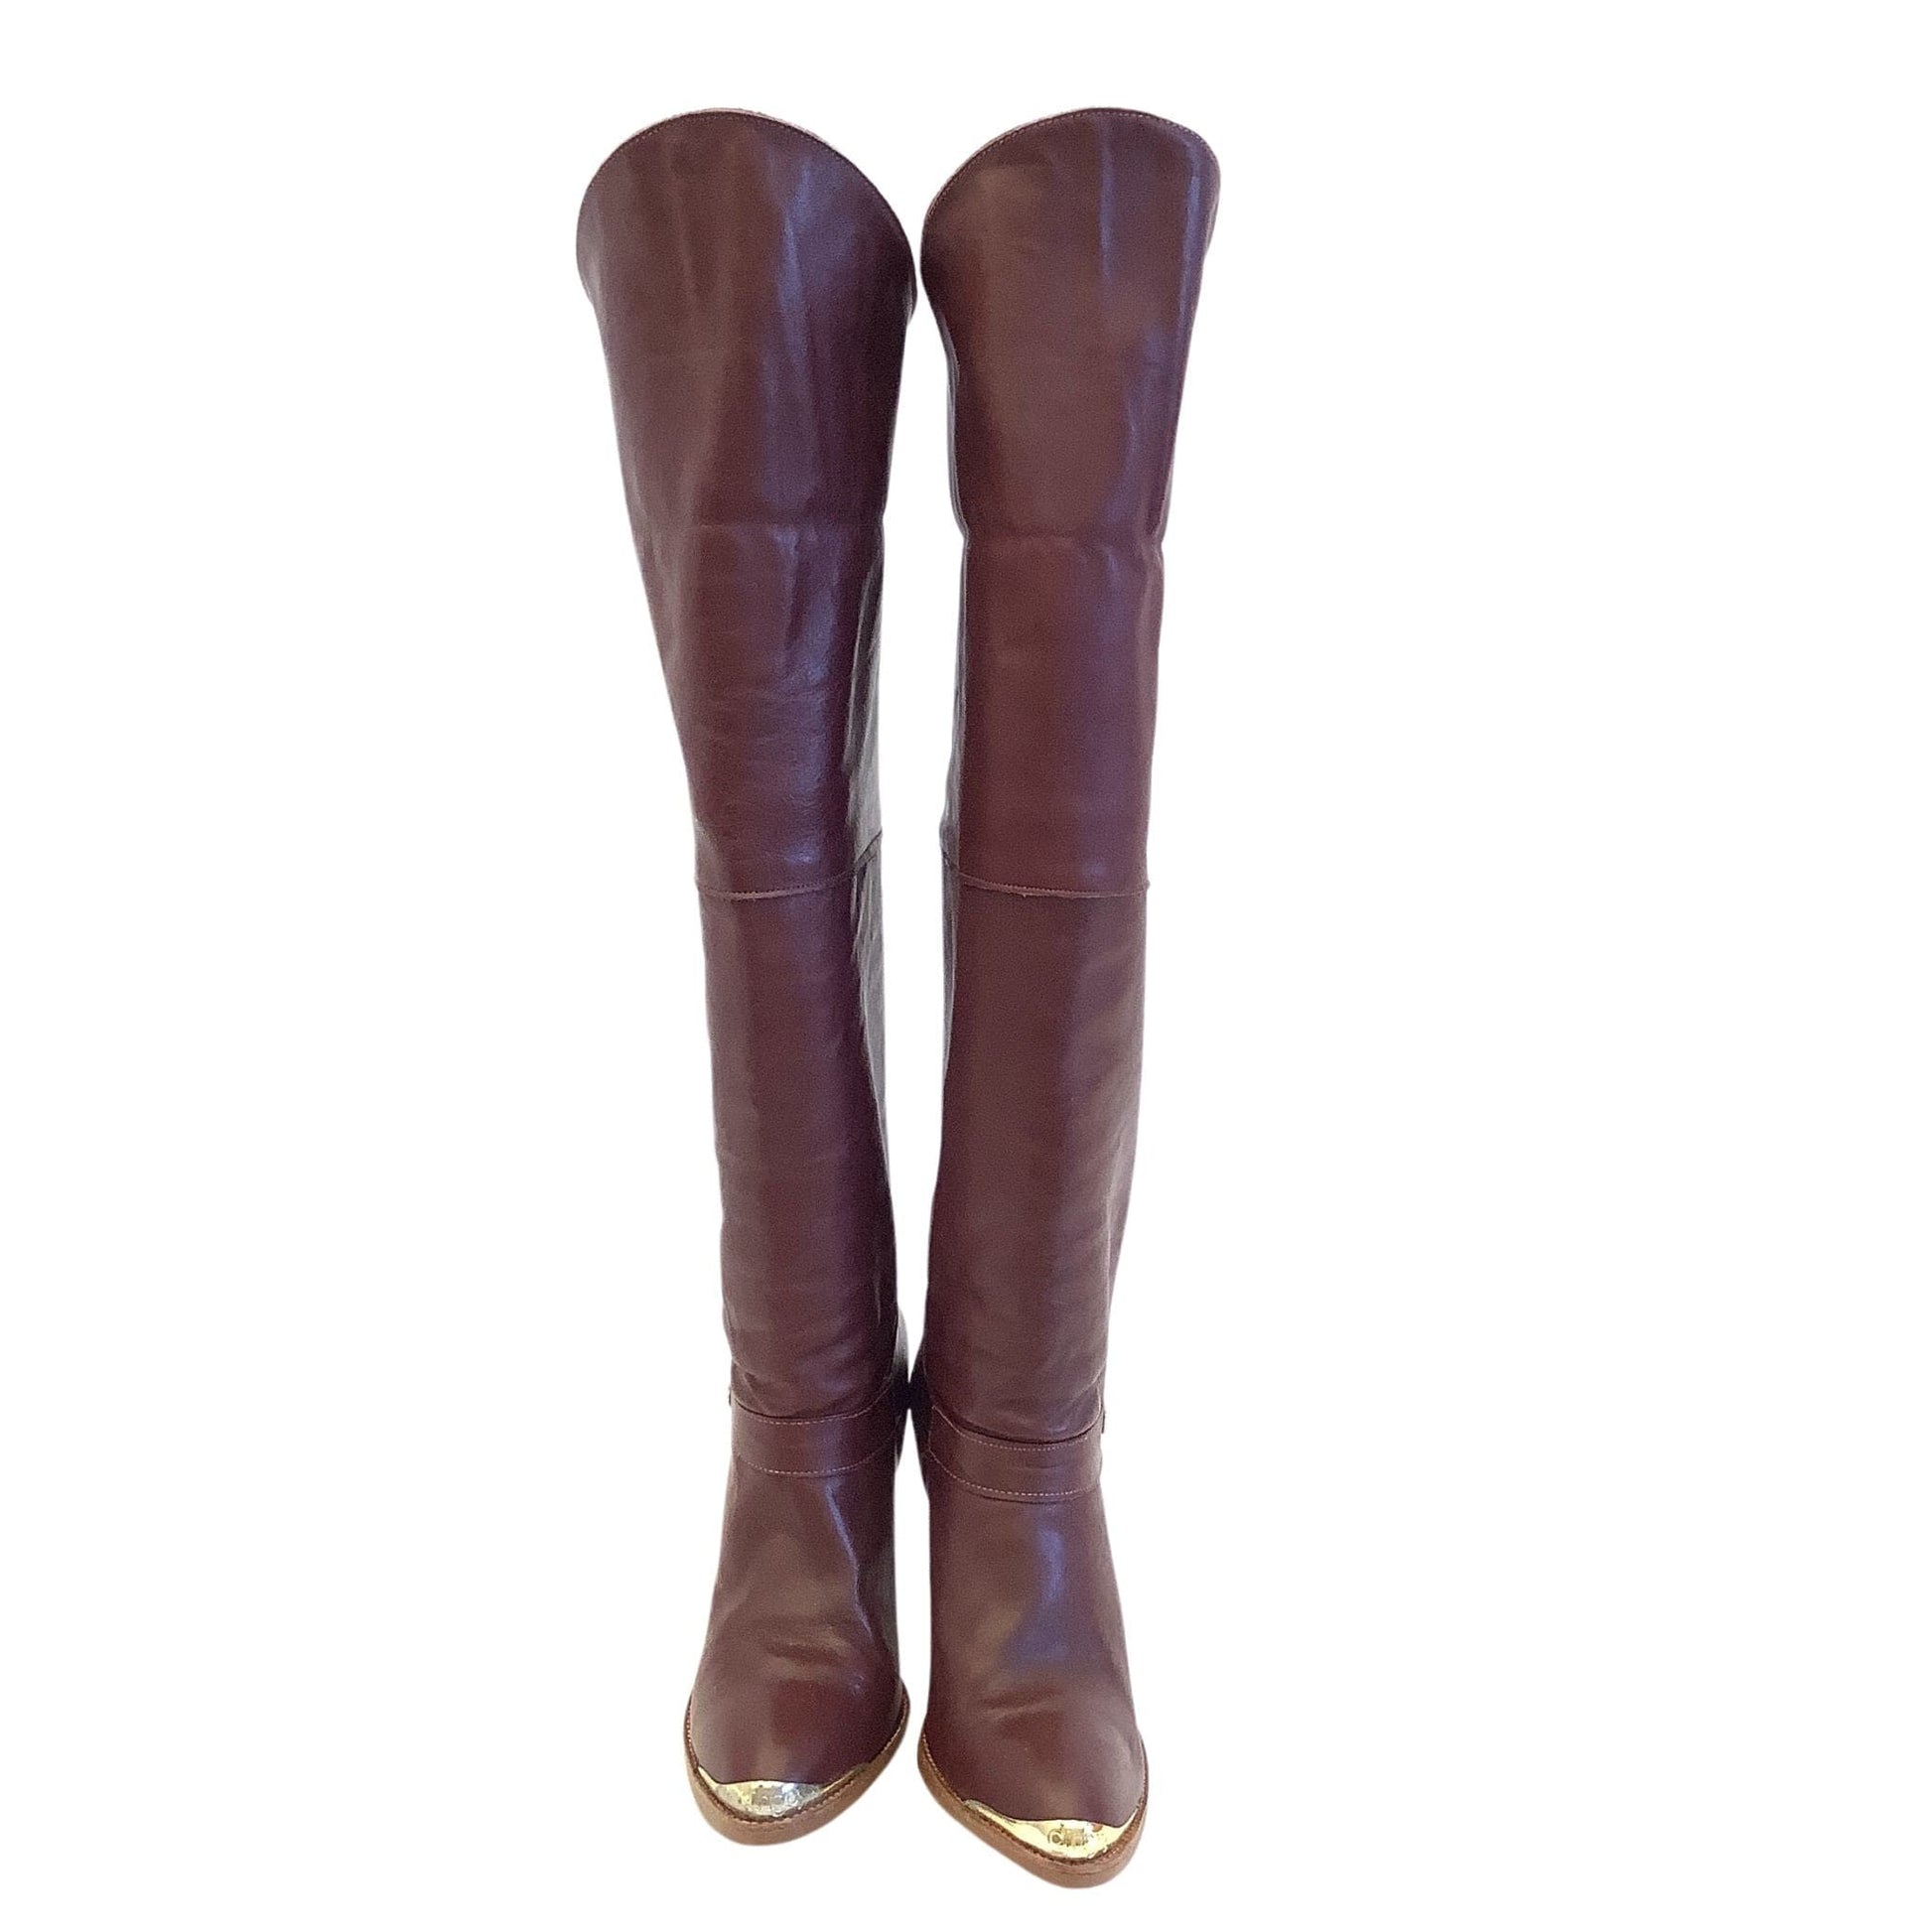 1980s Over the Knee Boots 6.5 / Burgundy / Vintage 1980s